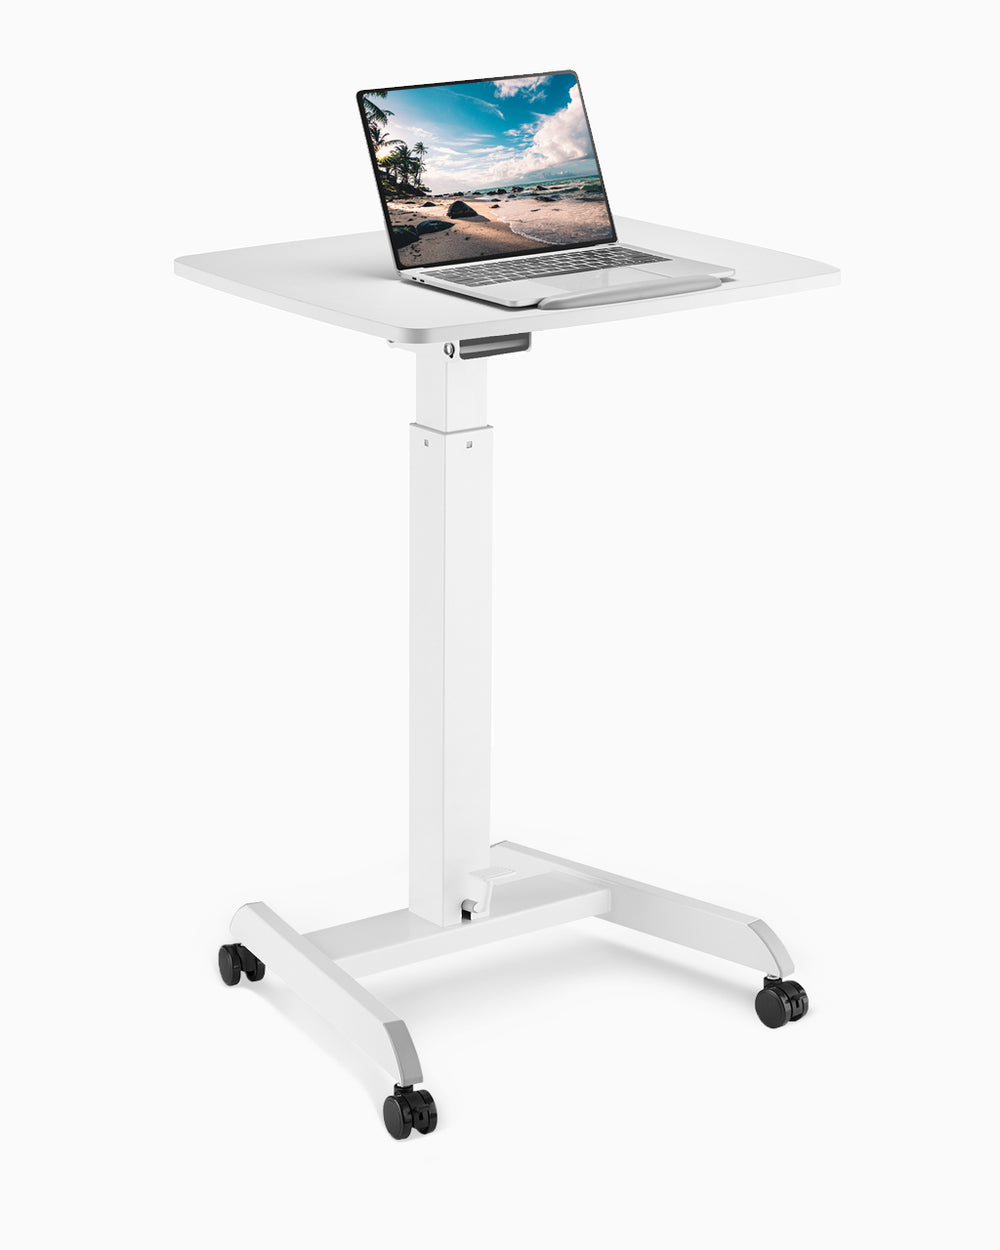 OCOMMO *UPGRADED* Height Adjustable Laptop Stand Workstation with Whee ...